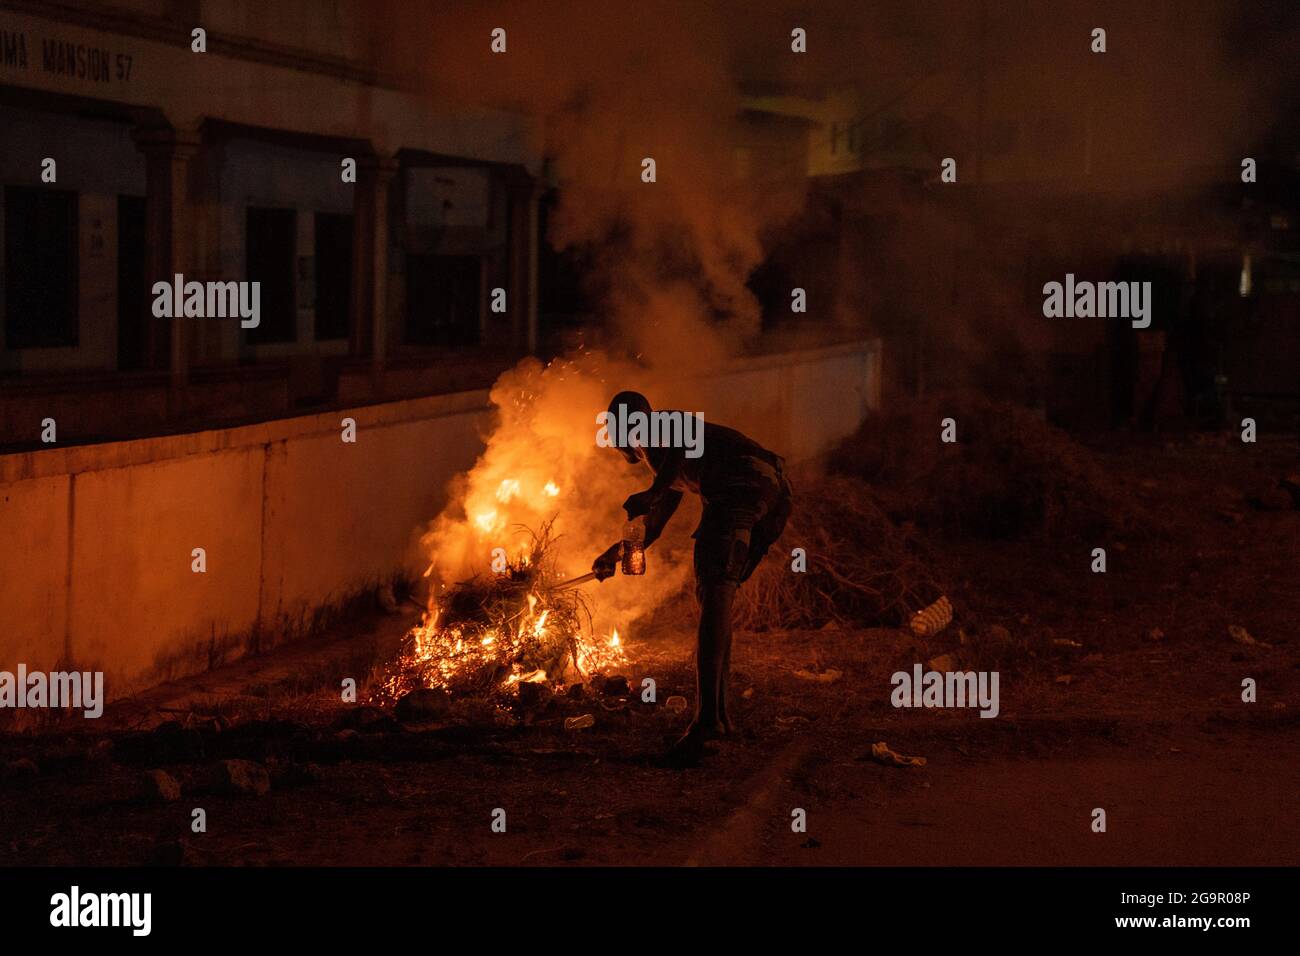 Man sets fire on Street in West Africa Stock Photo